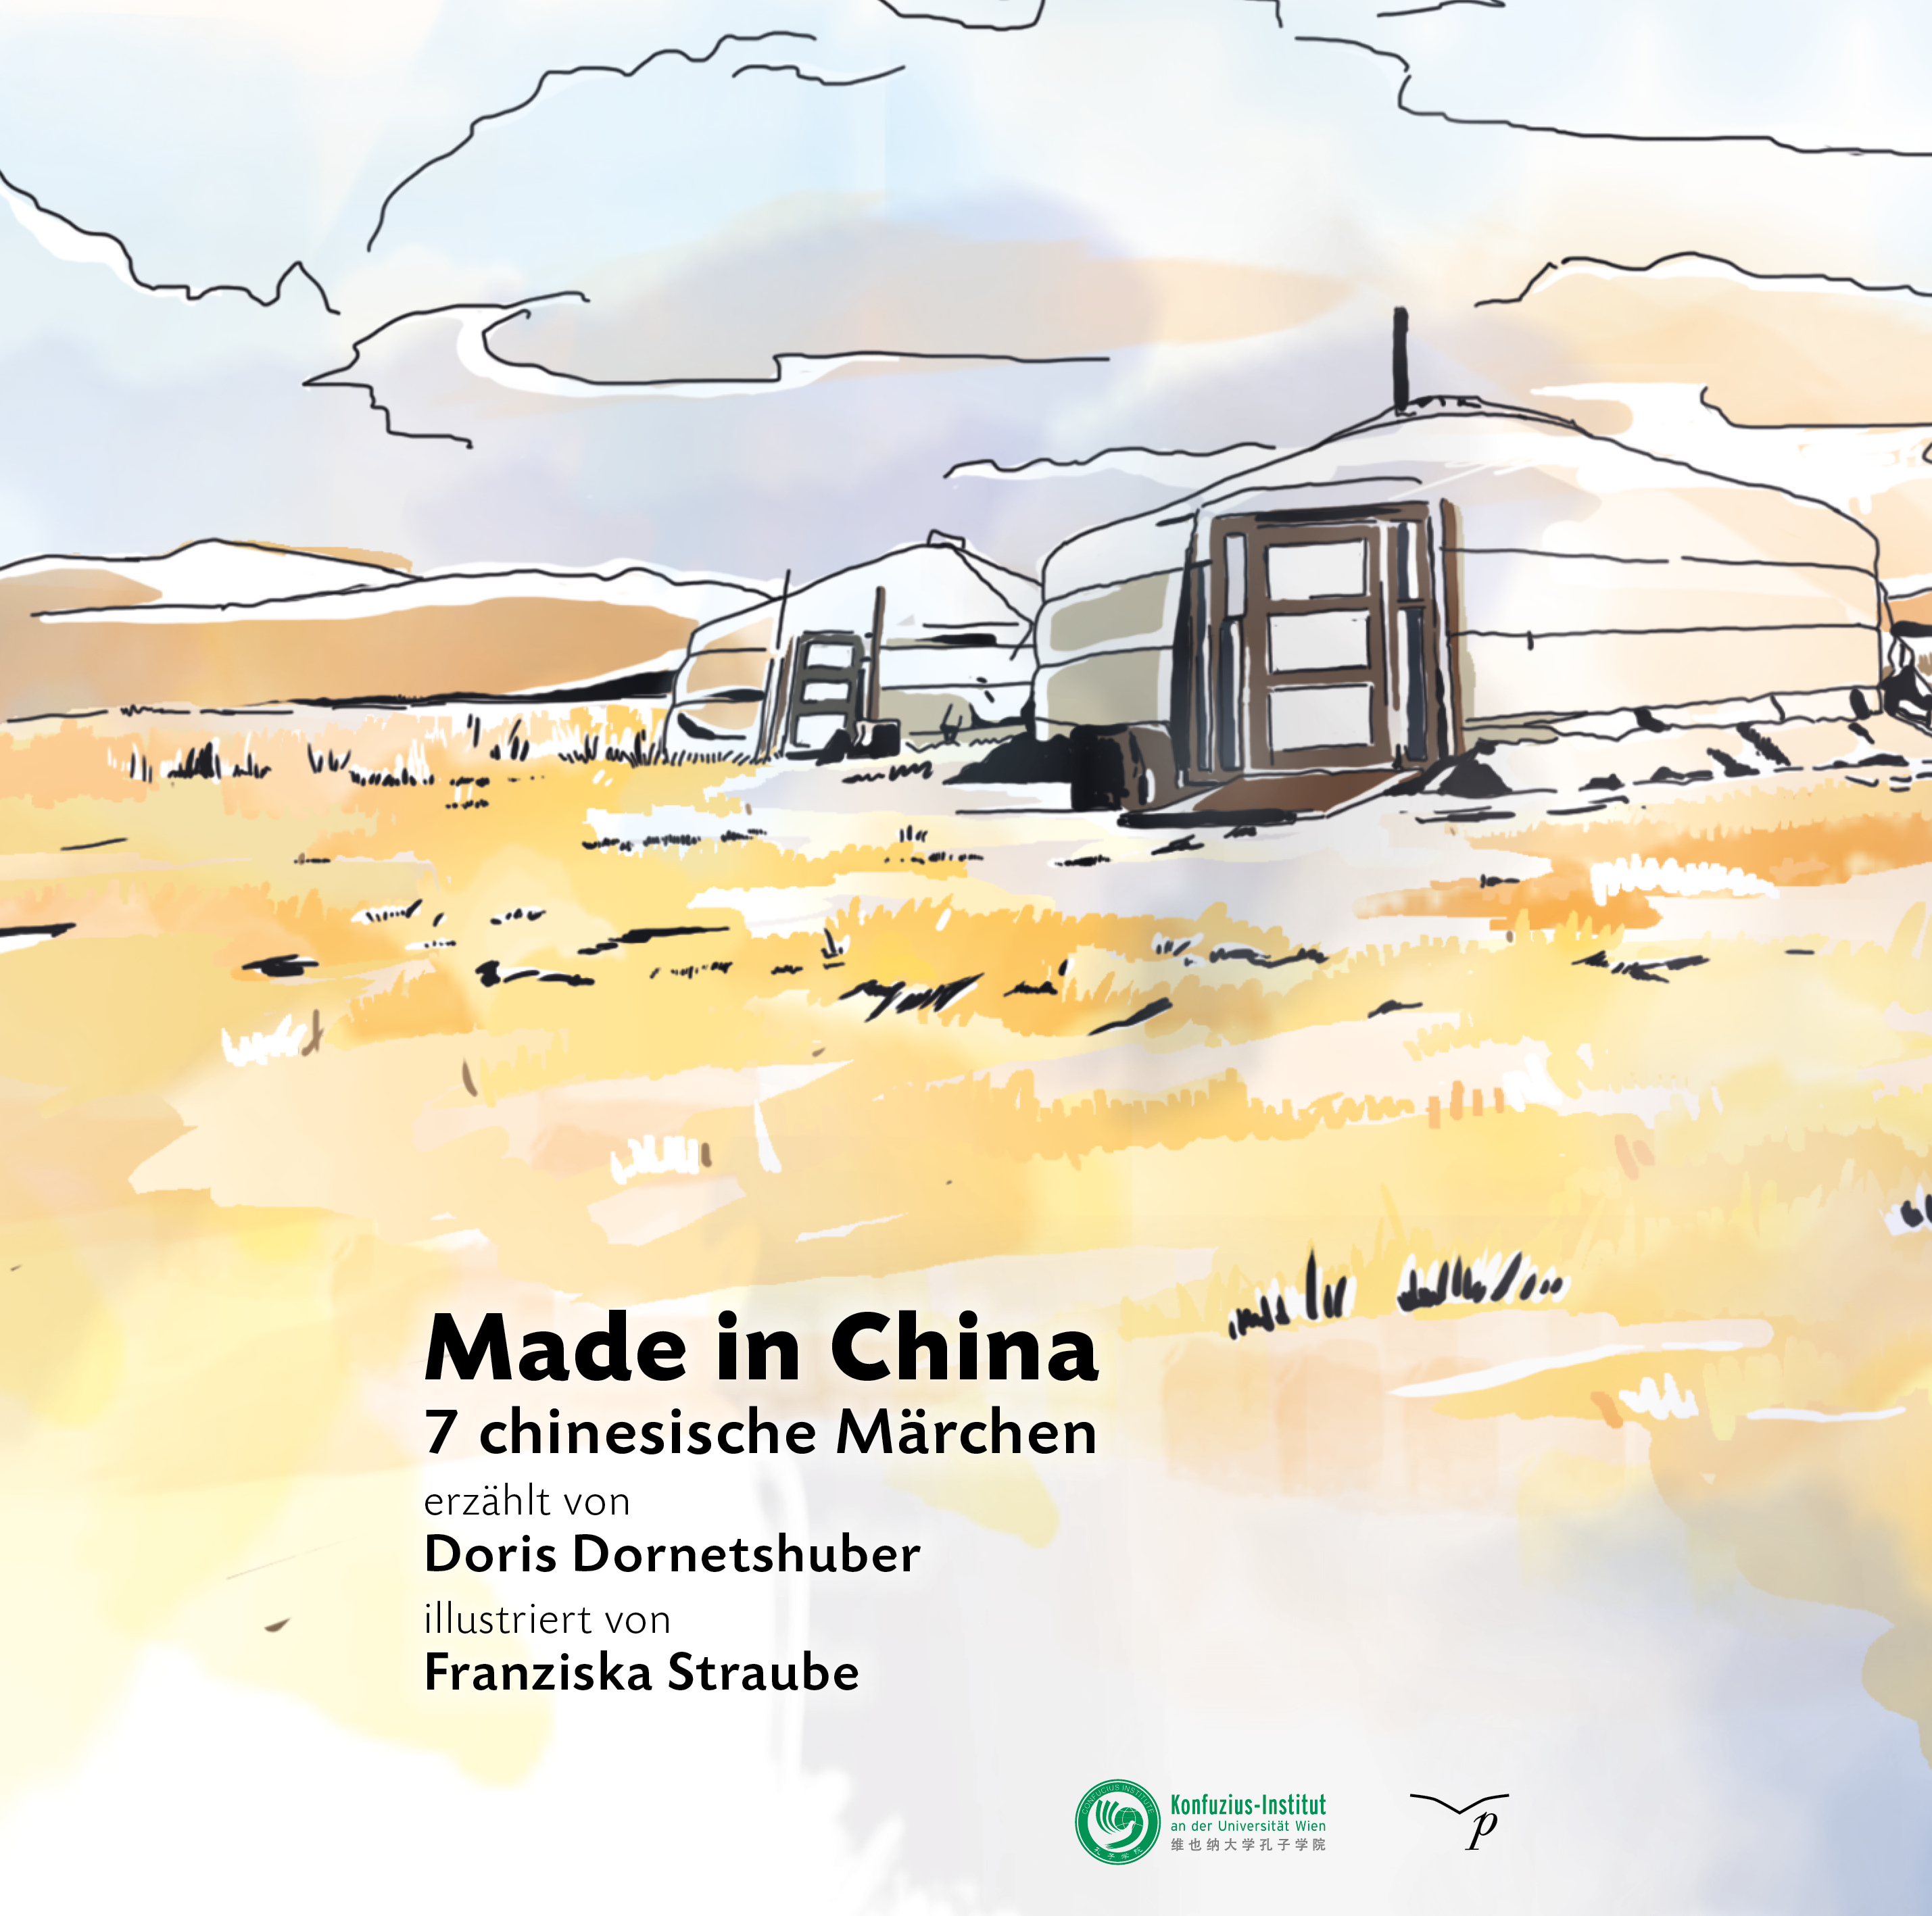 Buch-Cover von „Made in China“